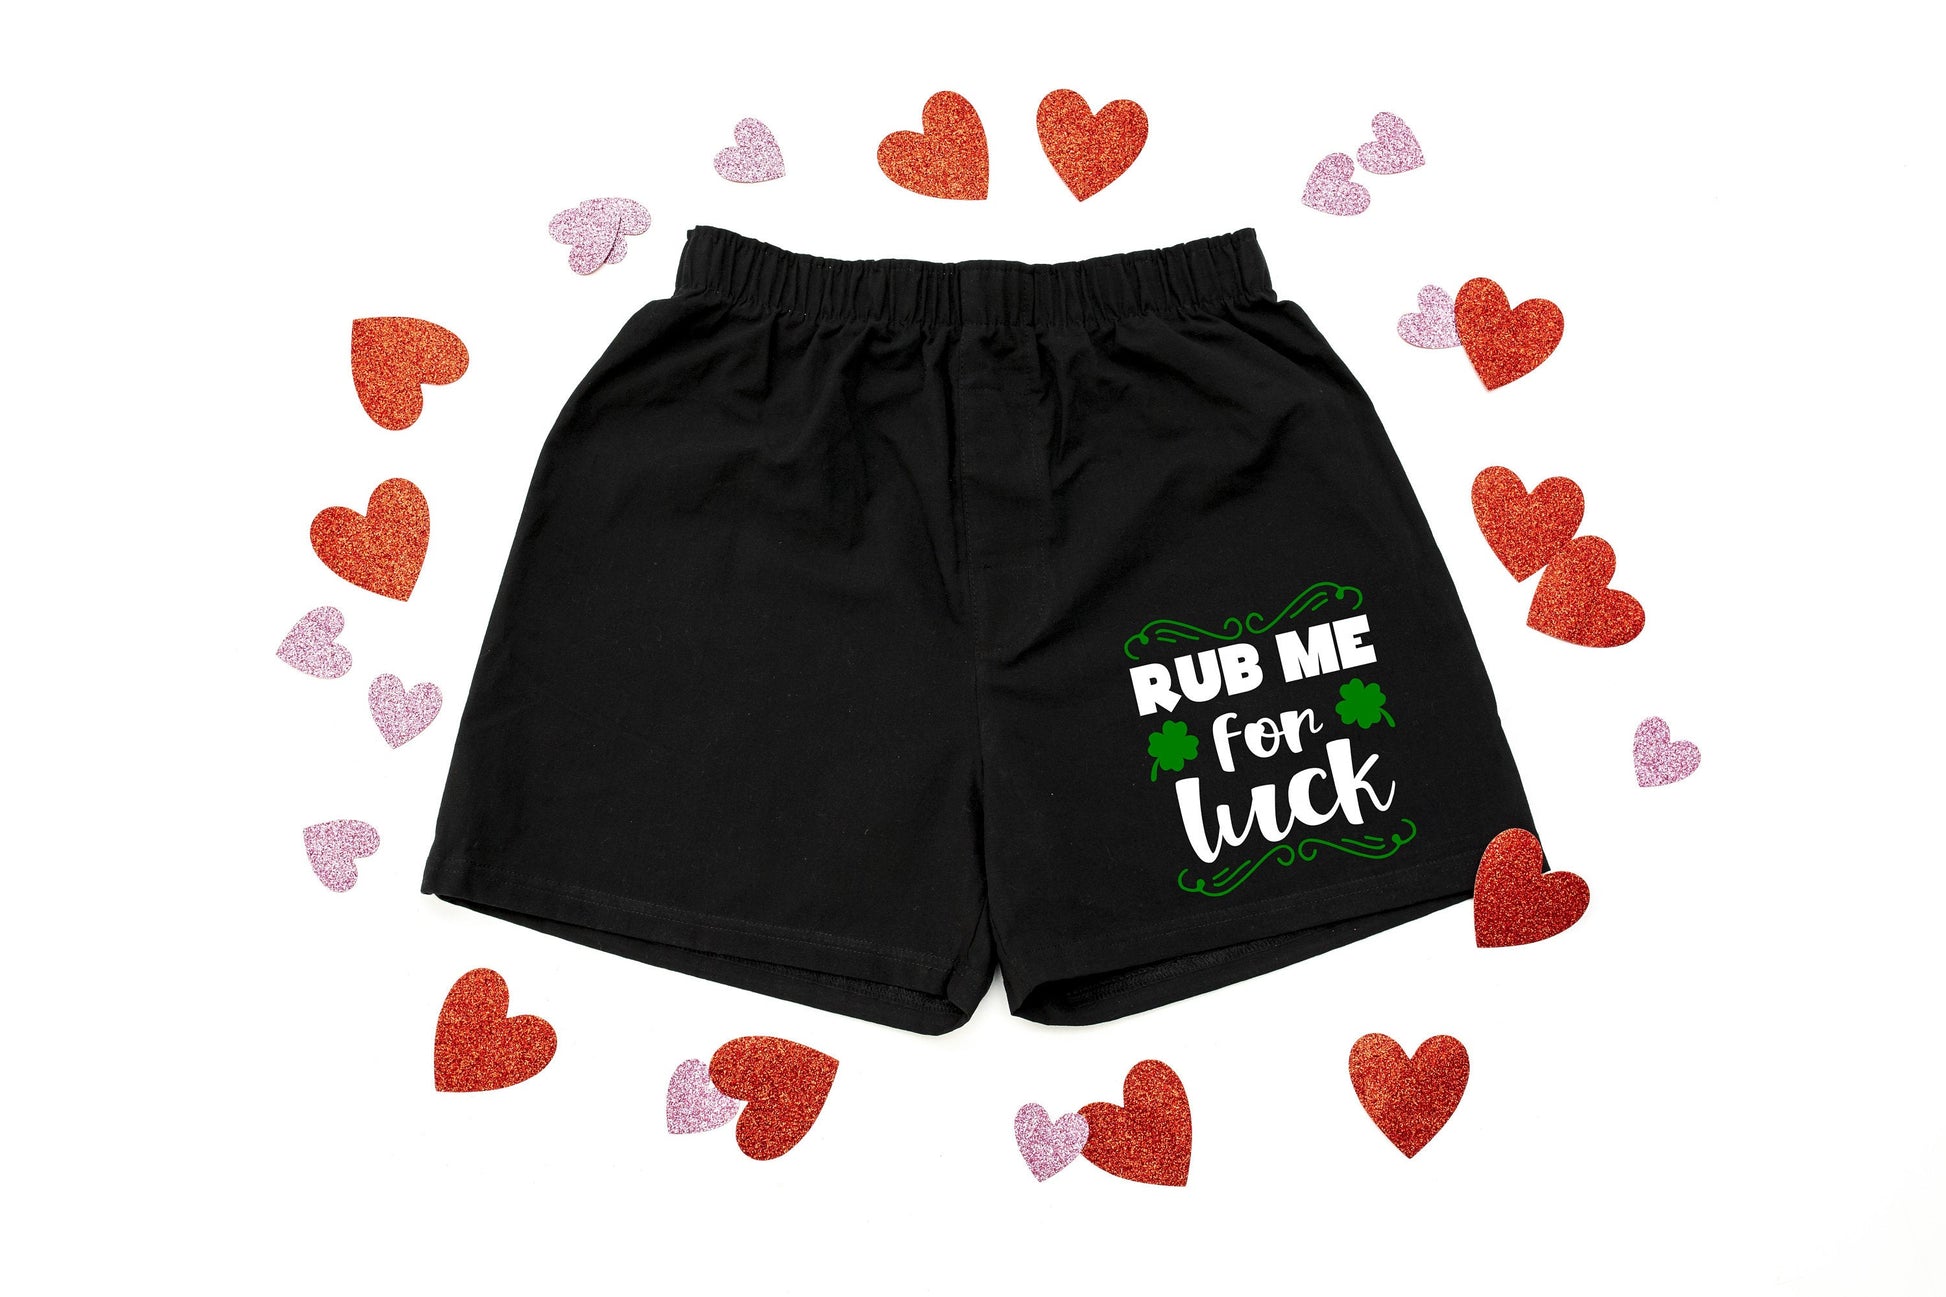 Rub Me For Luck Men&#39;s St Patrick&#39;s Day Cotton Boxer Shorts - False Fly - Gift for Him - Mens Boxers - Funny Boxers - Naughty Boxers